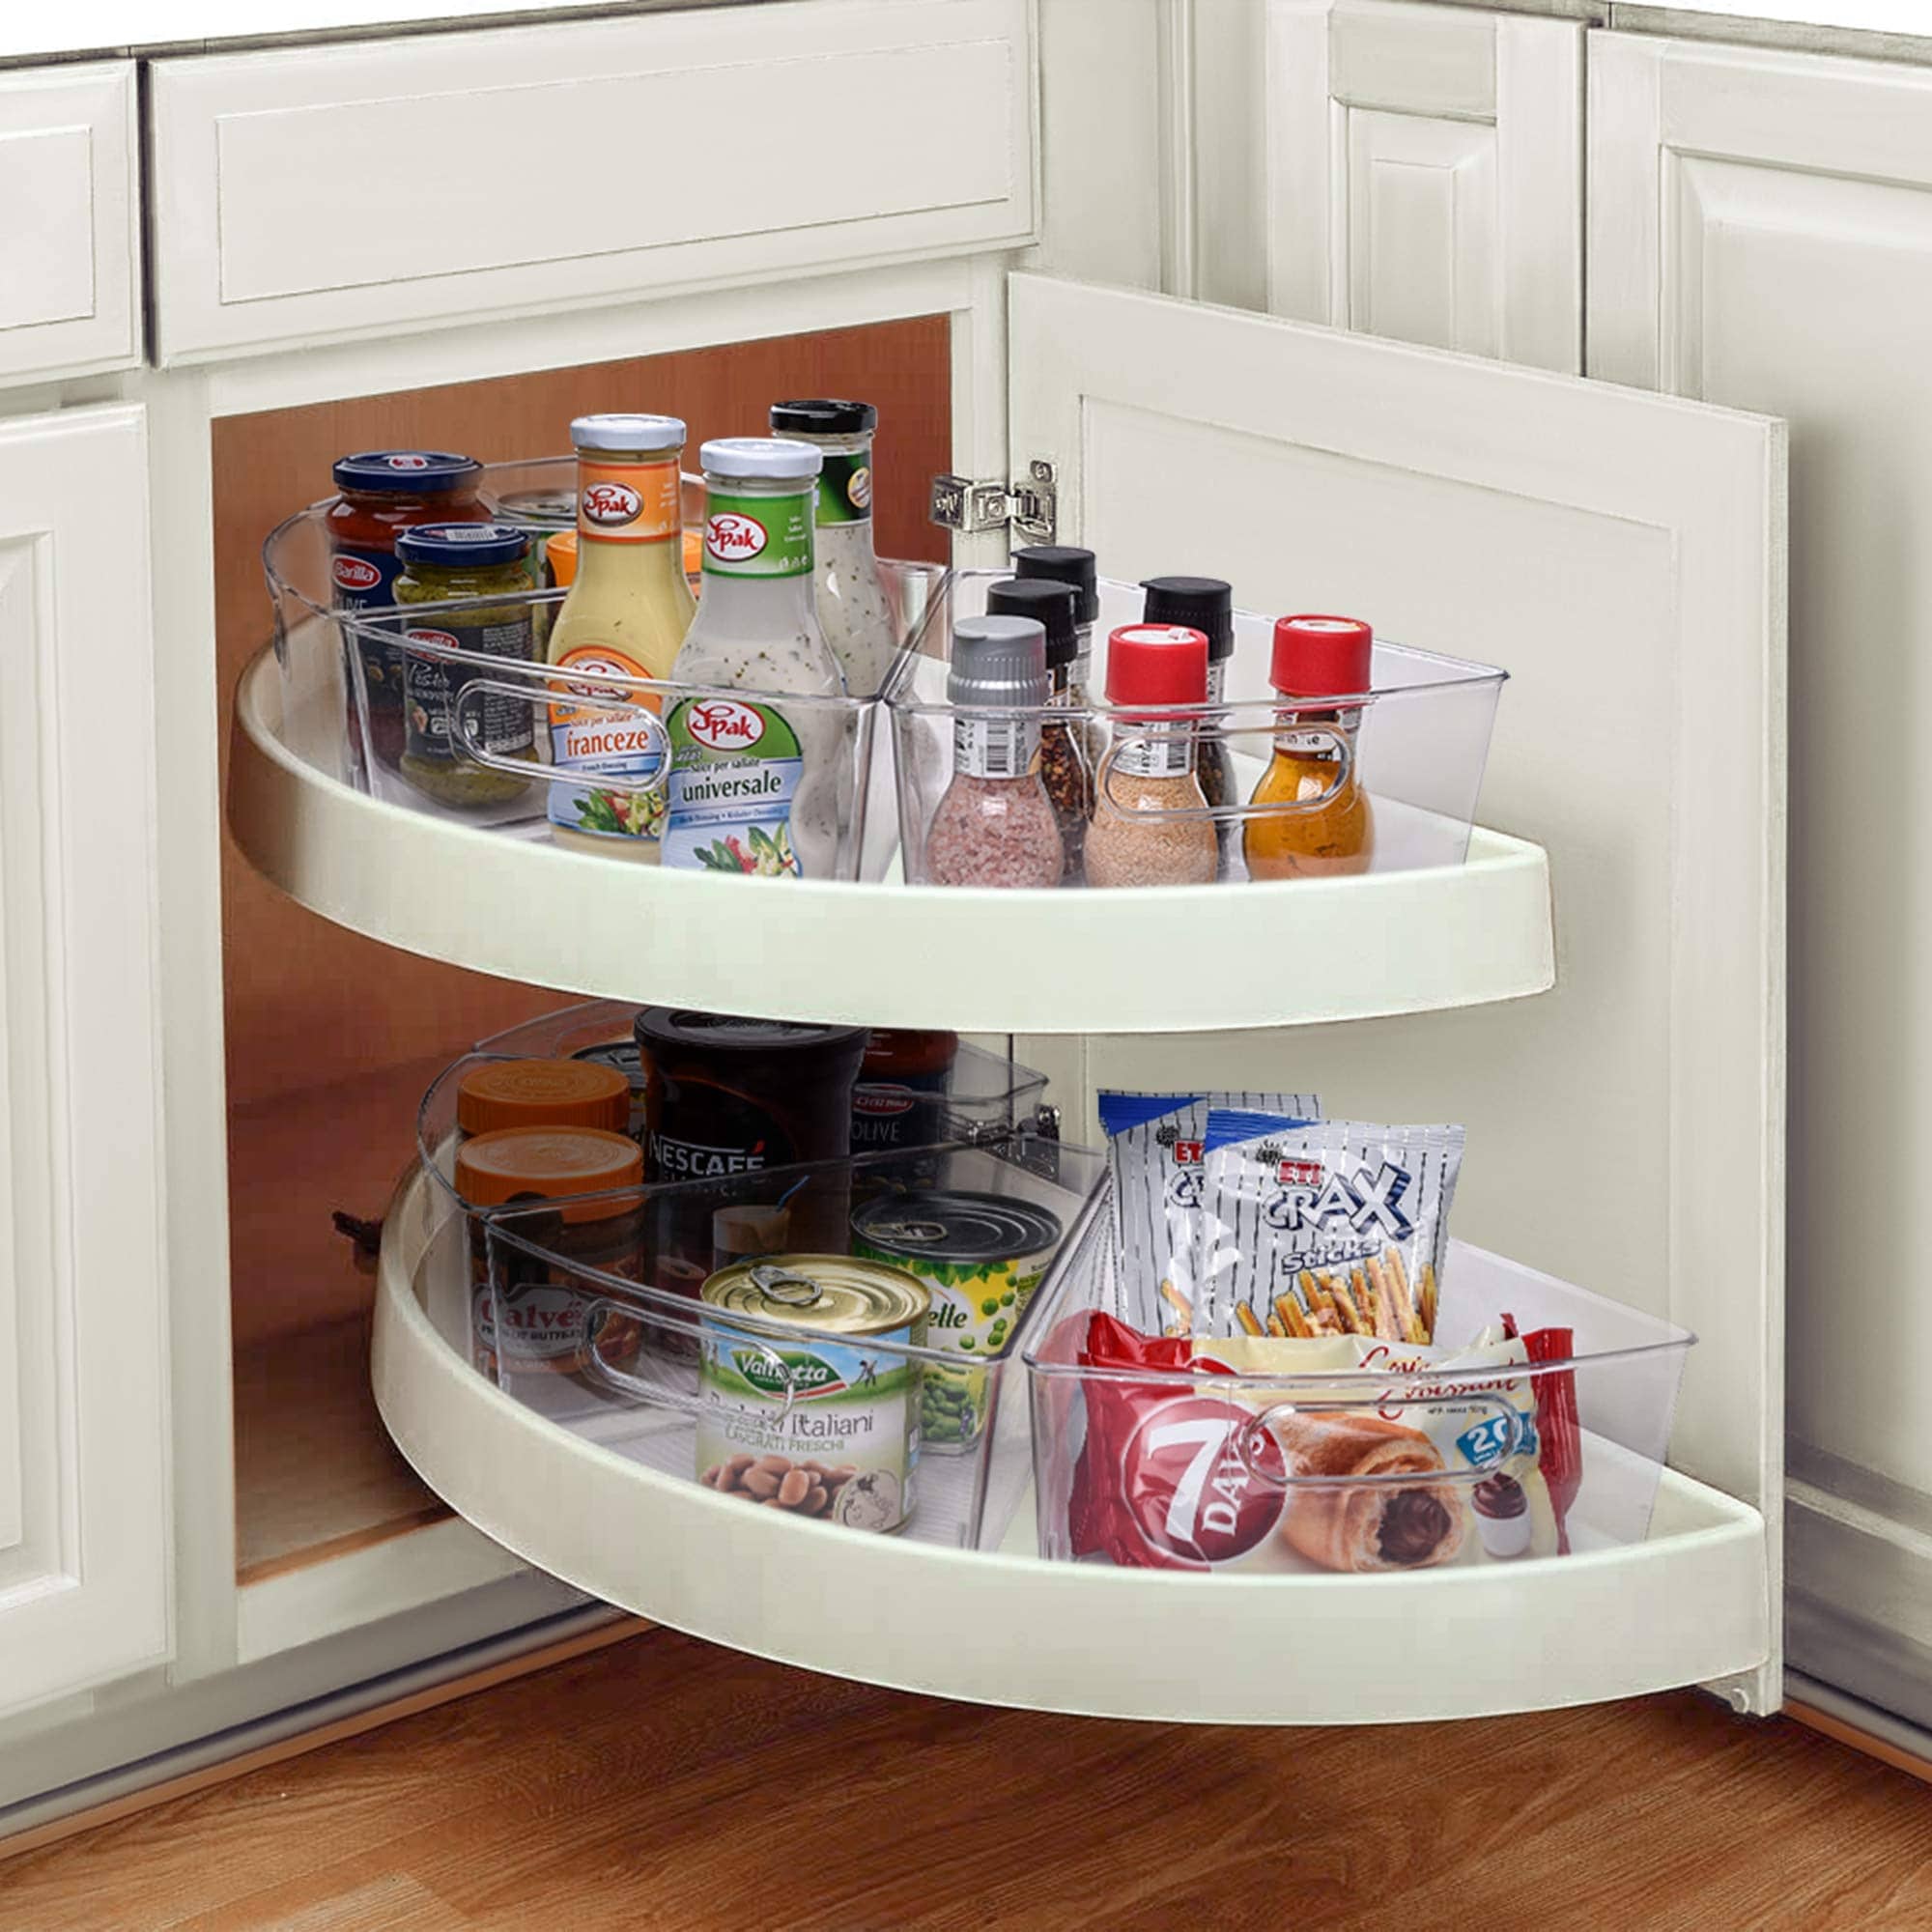 https://ak1.ostkcdn.com/images/products/is/images/direct/aae2bcc0d22f69b37f72f72d65a7a19522305c1e/4-Pack-Lazy-Susan-Organizer-w--Front-Handle%2C-Wedge-Storage-Bin-Cabinet-Container.jpg